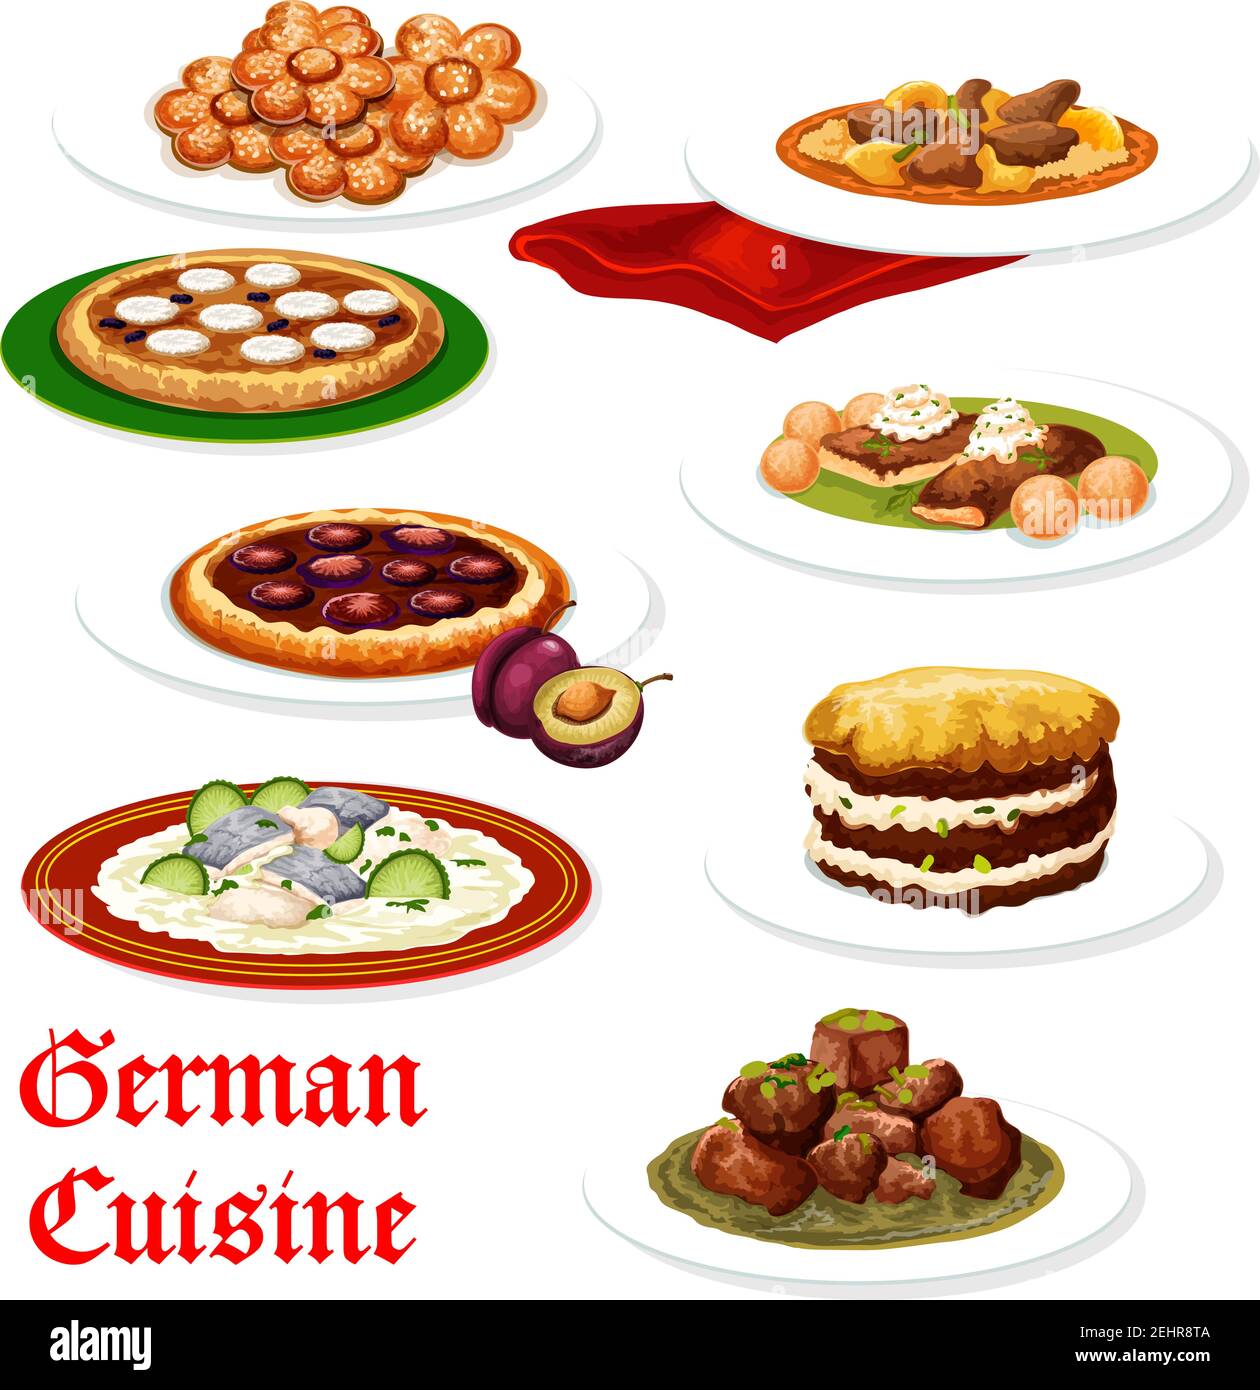 German cuisine sausage and potato casserole, meat stew with beer and pork schnitzel with egg, fish and seafood stew, kidney rice and sugar cookie, plu Stock Vector